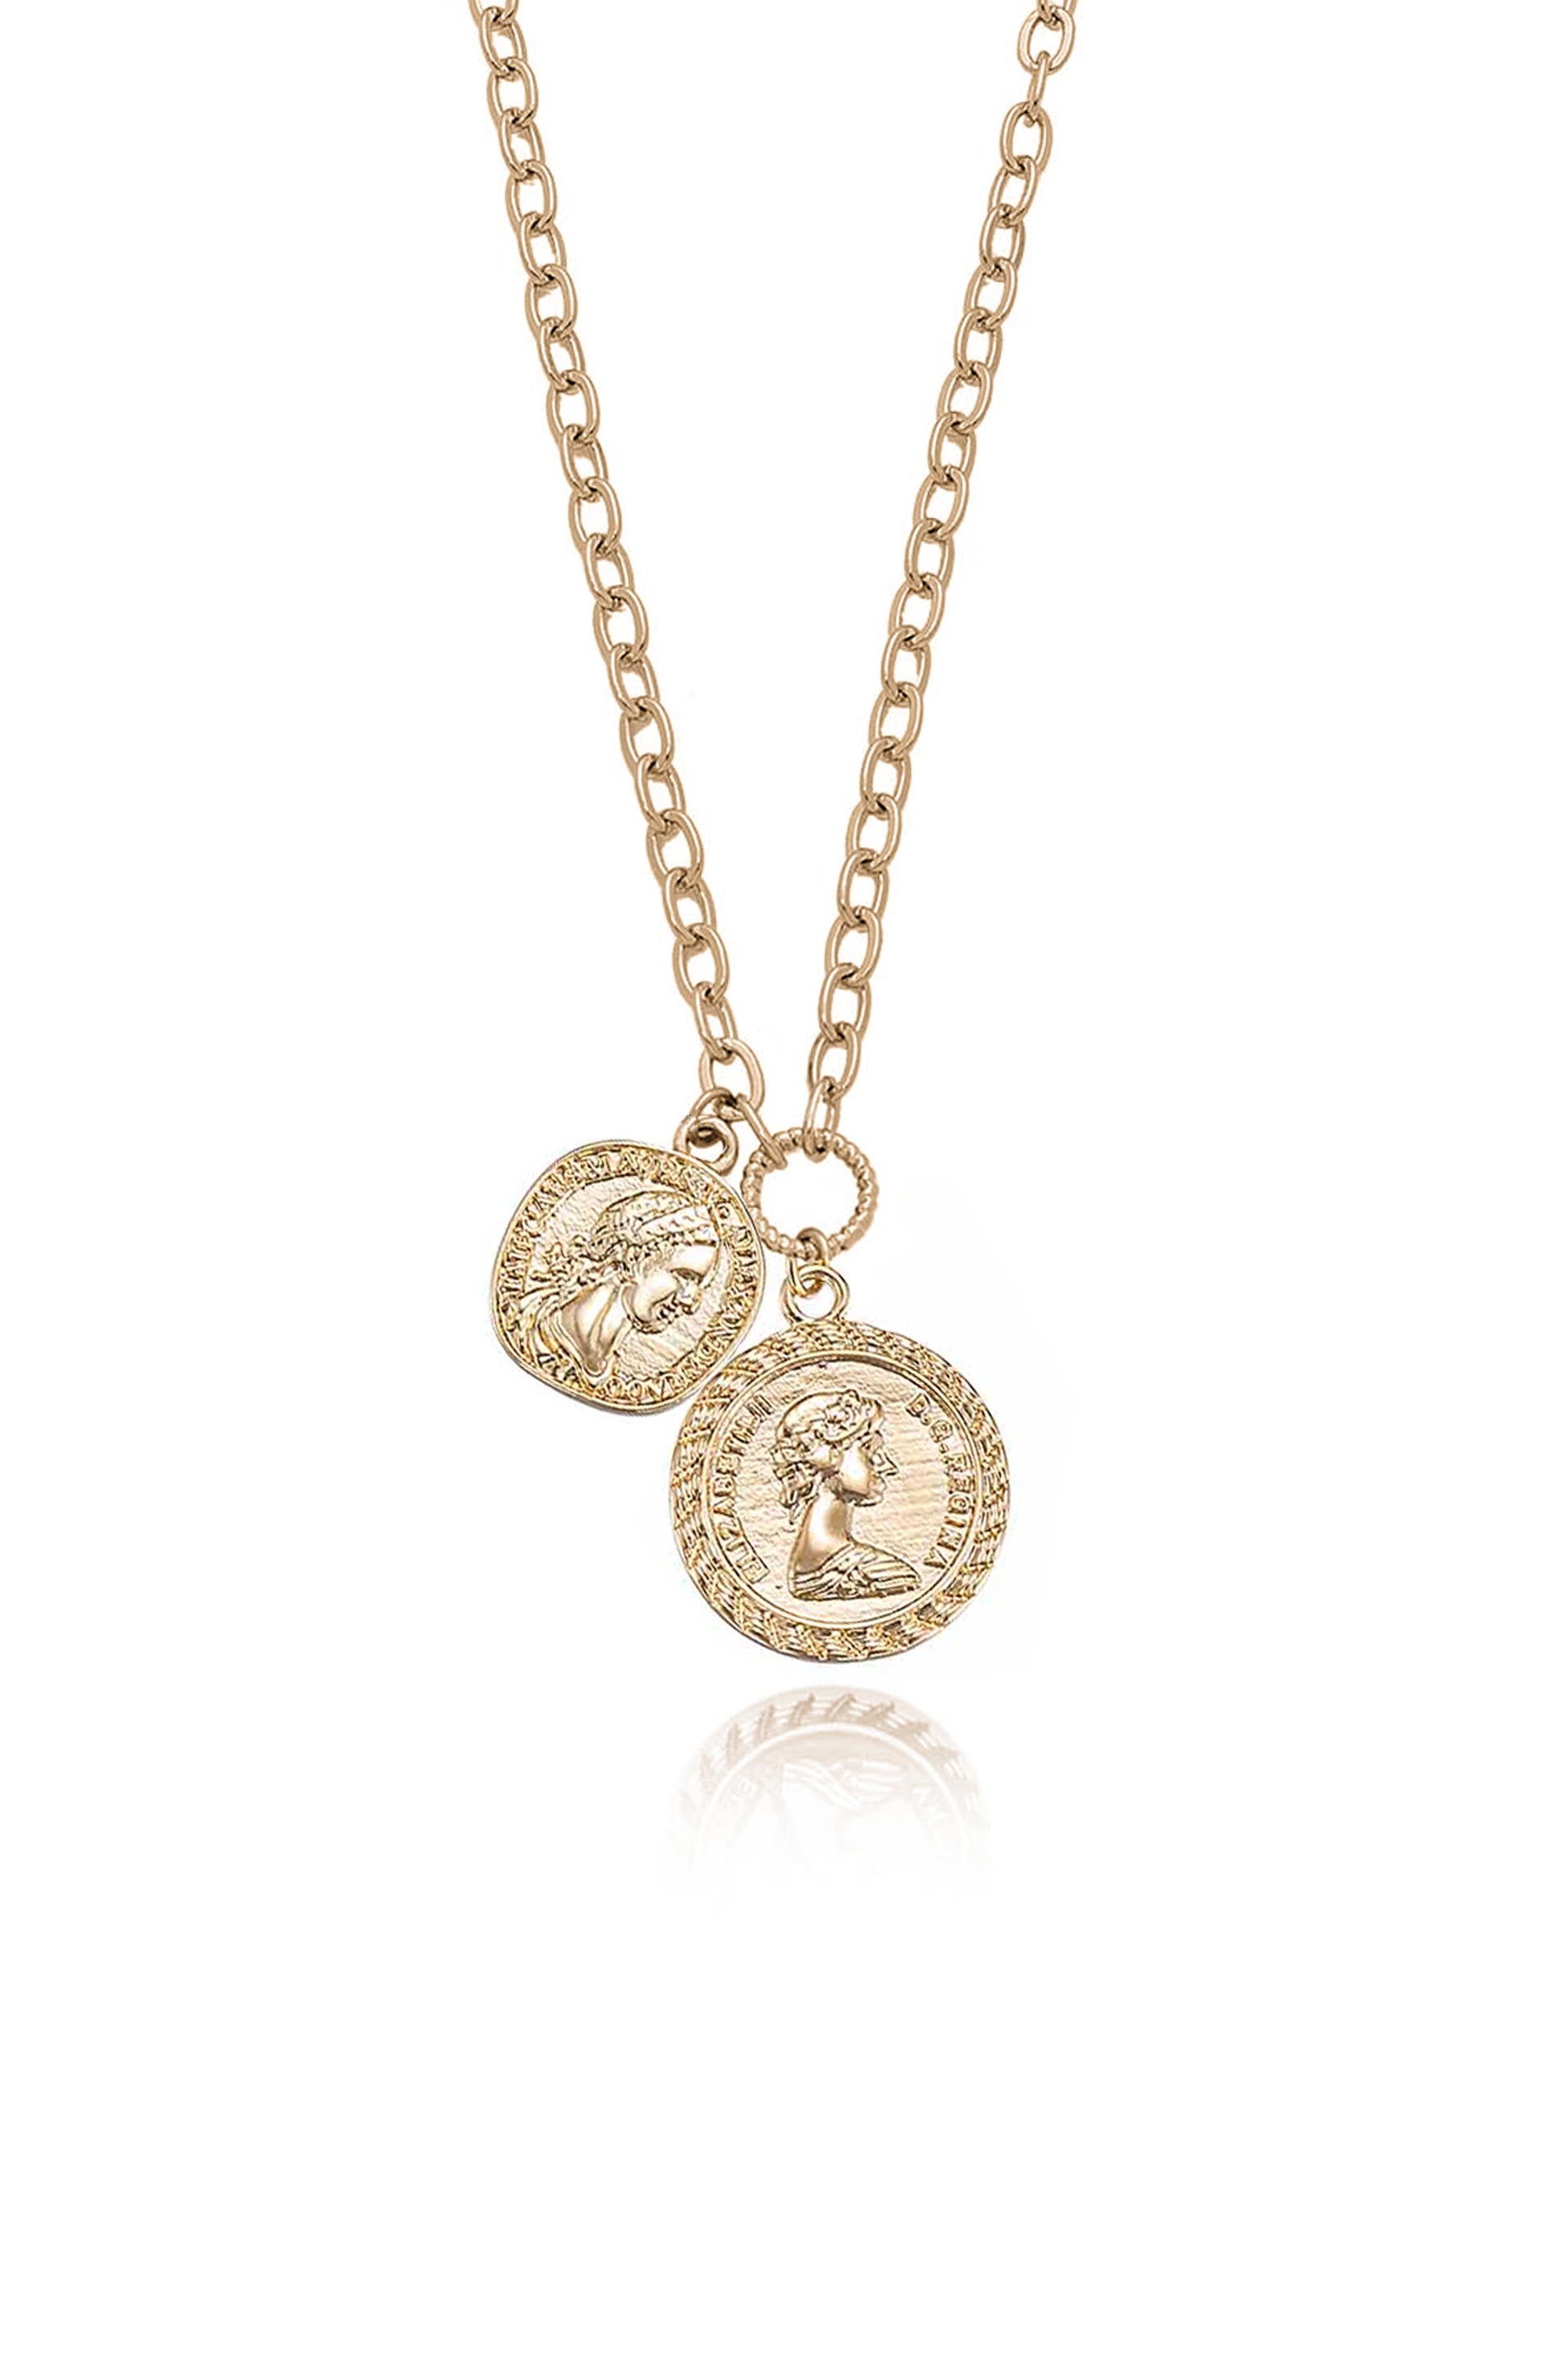 Pendant Coin Necklace with Symbol and Inspired Word - JOY – Jane Win by  Jane Winchester Paradis